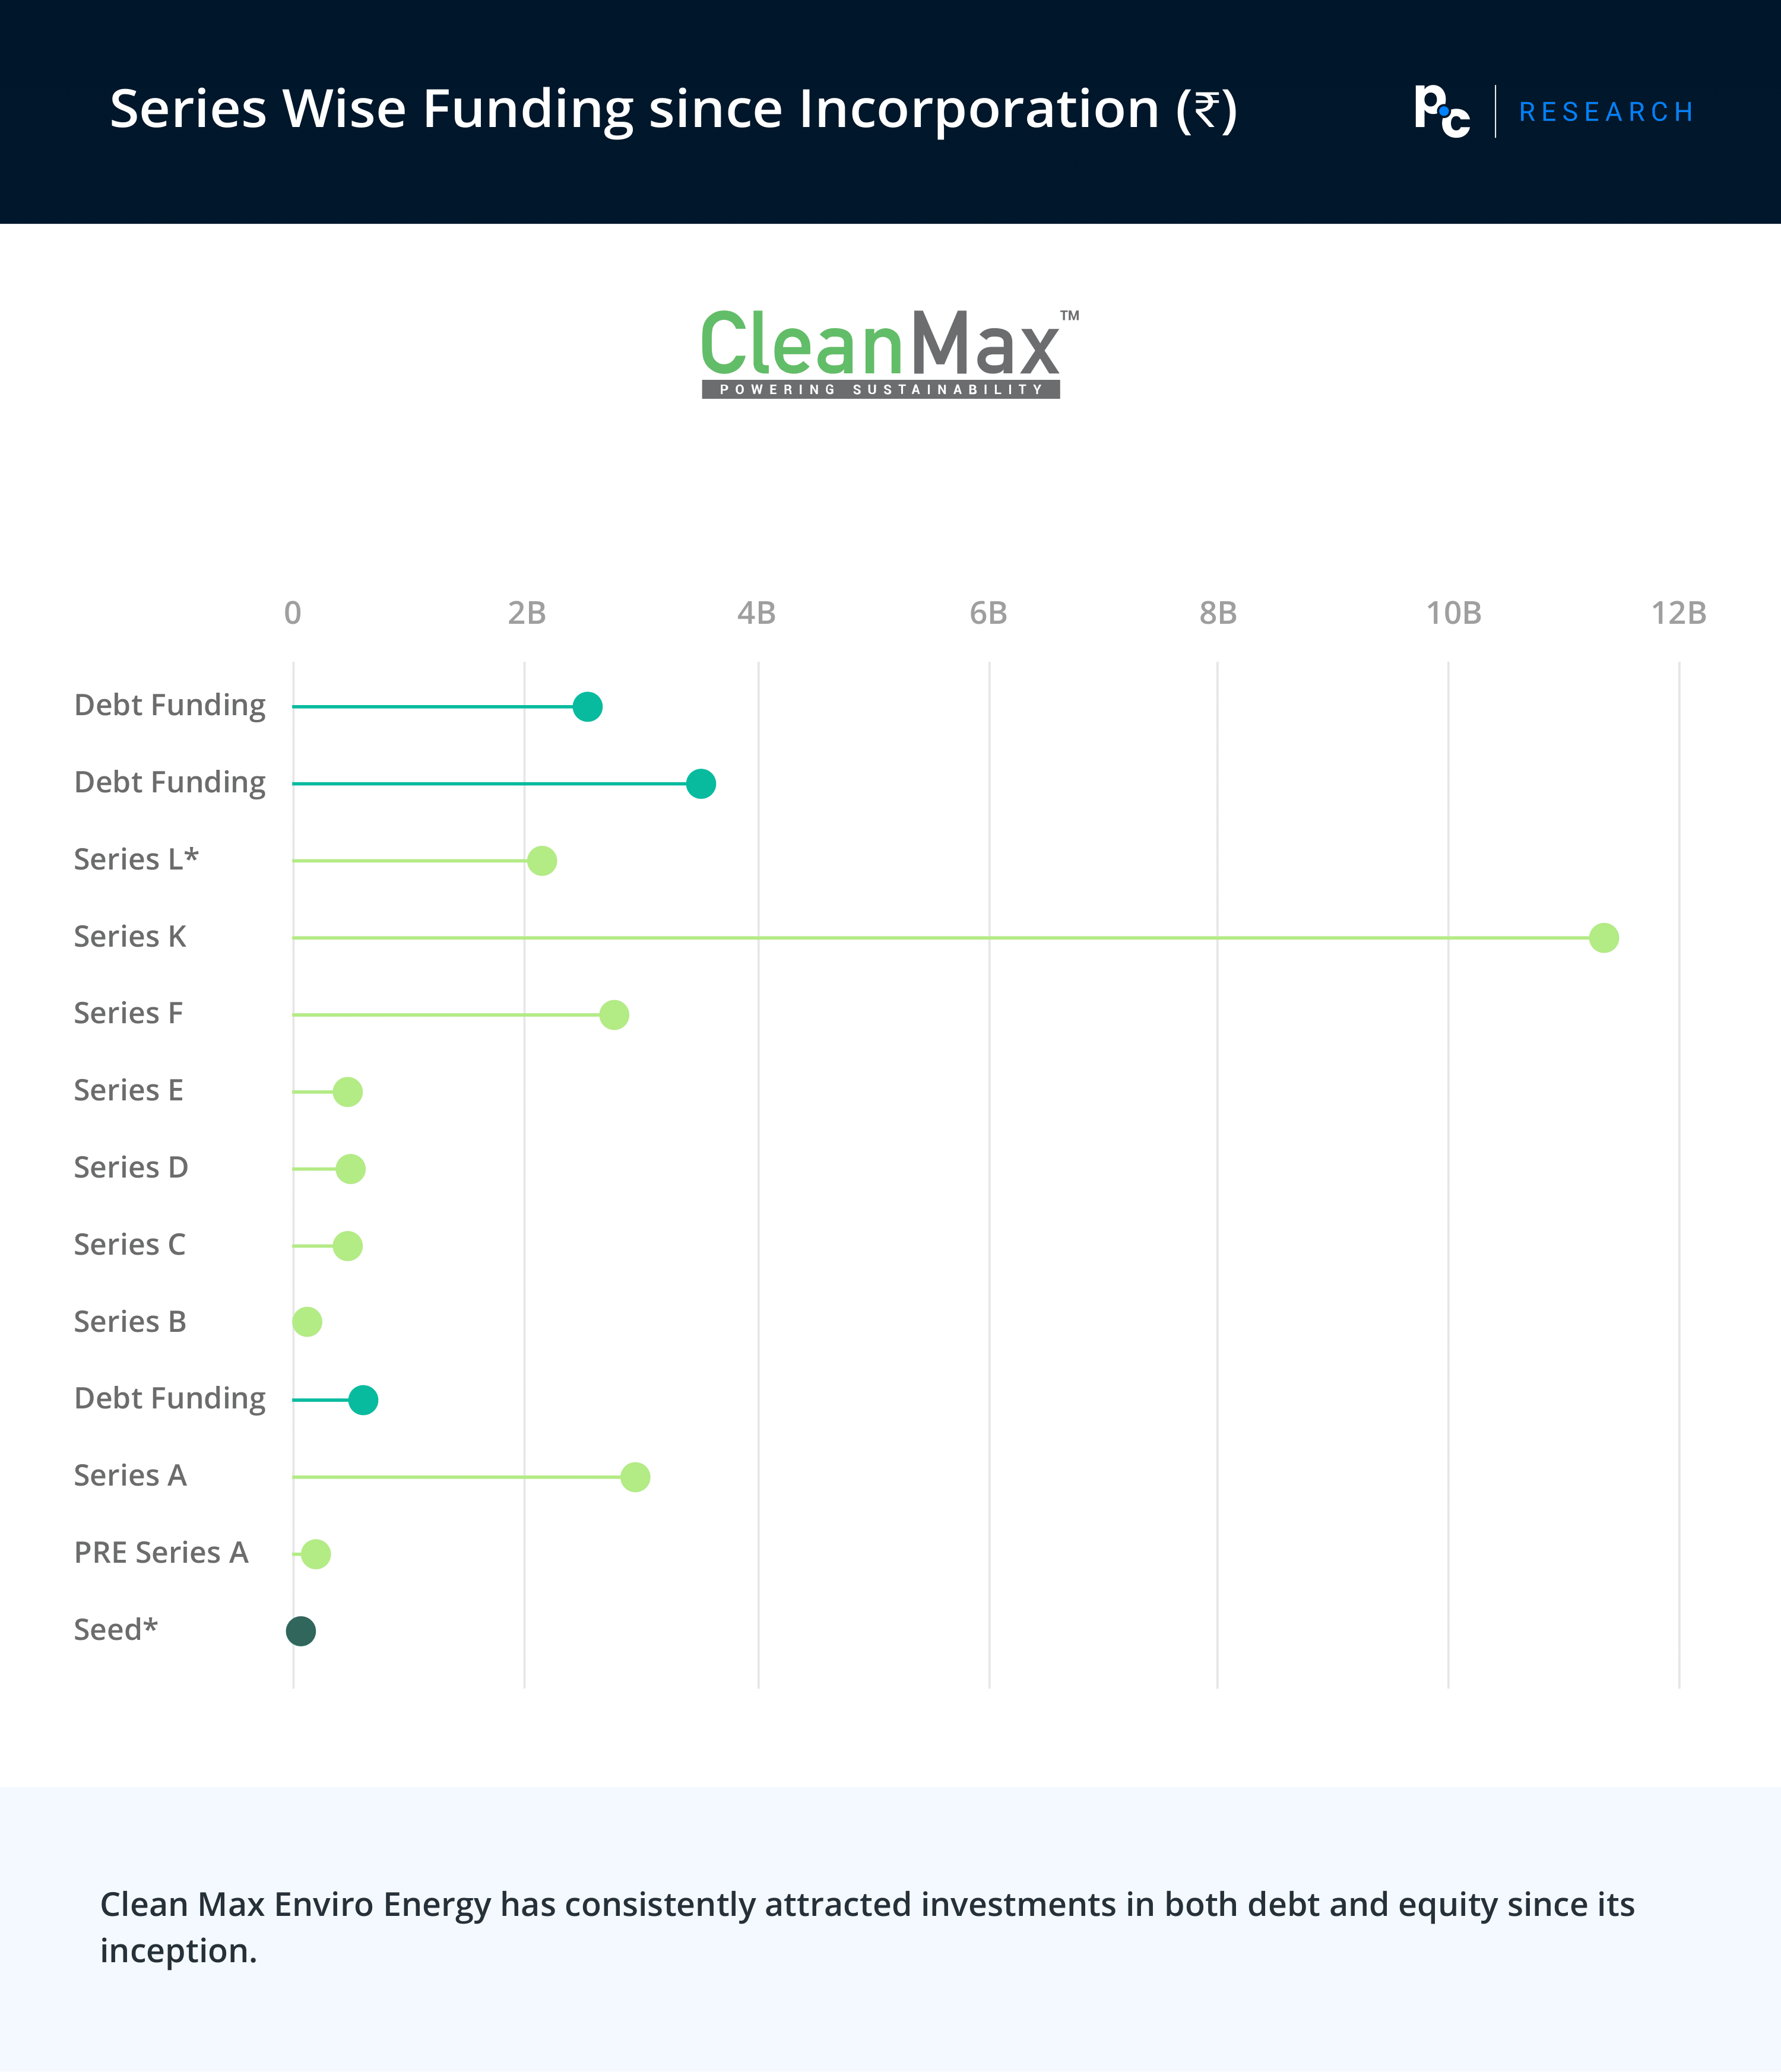 CleanMax: Series Wise Funding since Incorporation (₹).

Clean Max Enviro Energy has consistently attracted investments in both debt and equity since its inception.